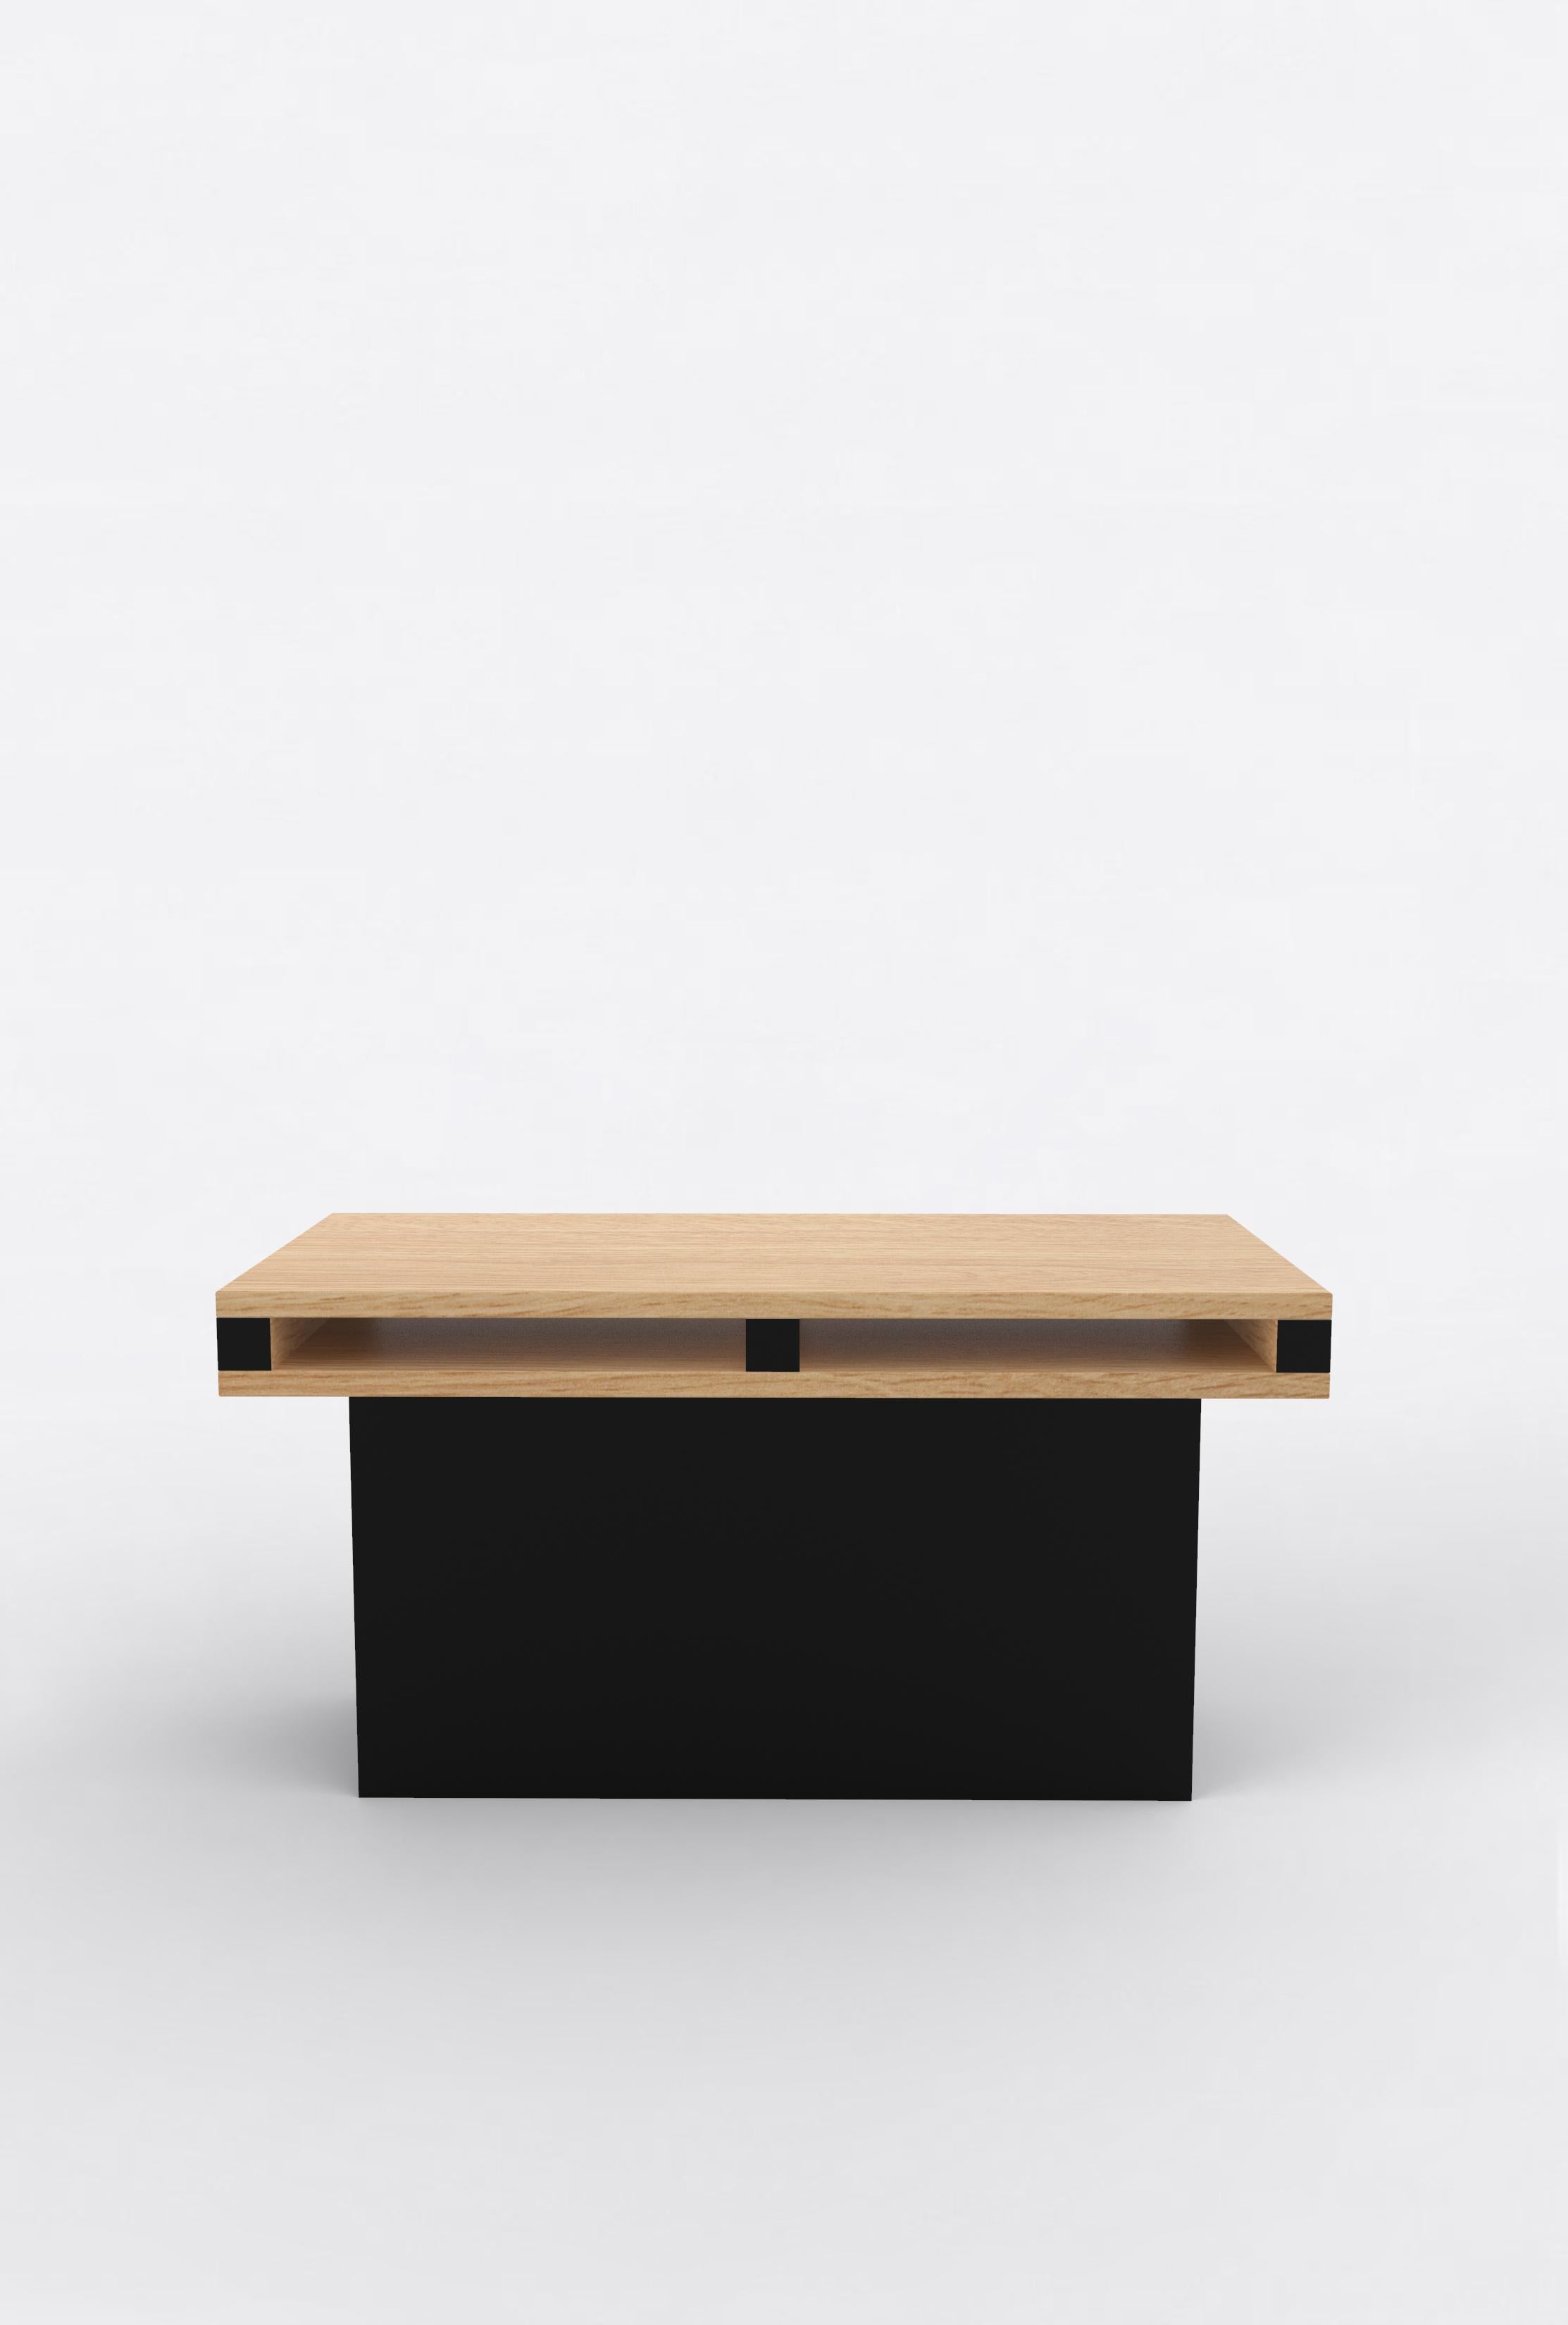 Orphan work 102 End Table
Shown in oak and black.
Available in natural oak with painted base.
Measures: 31” L x 15” D x 15” H

Orphan work is designed to complement in the heart of Soho, New York City. Each piece is handmade in New York and Los